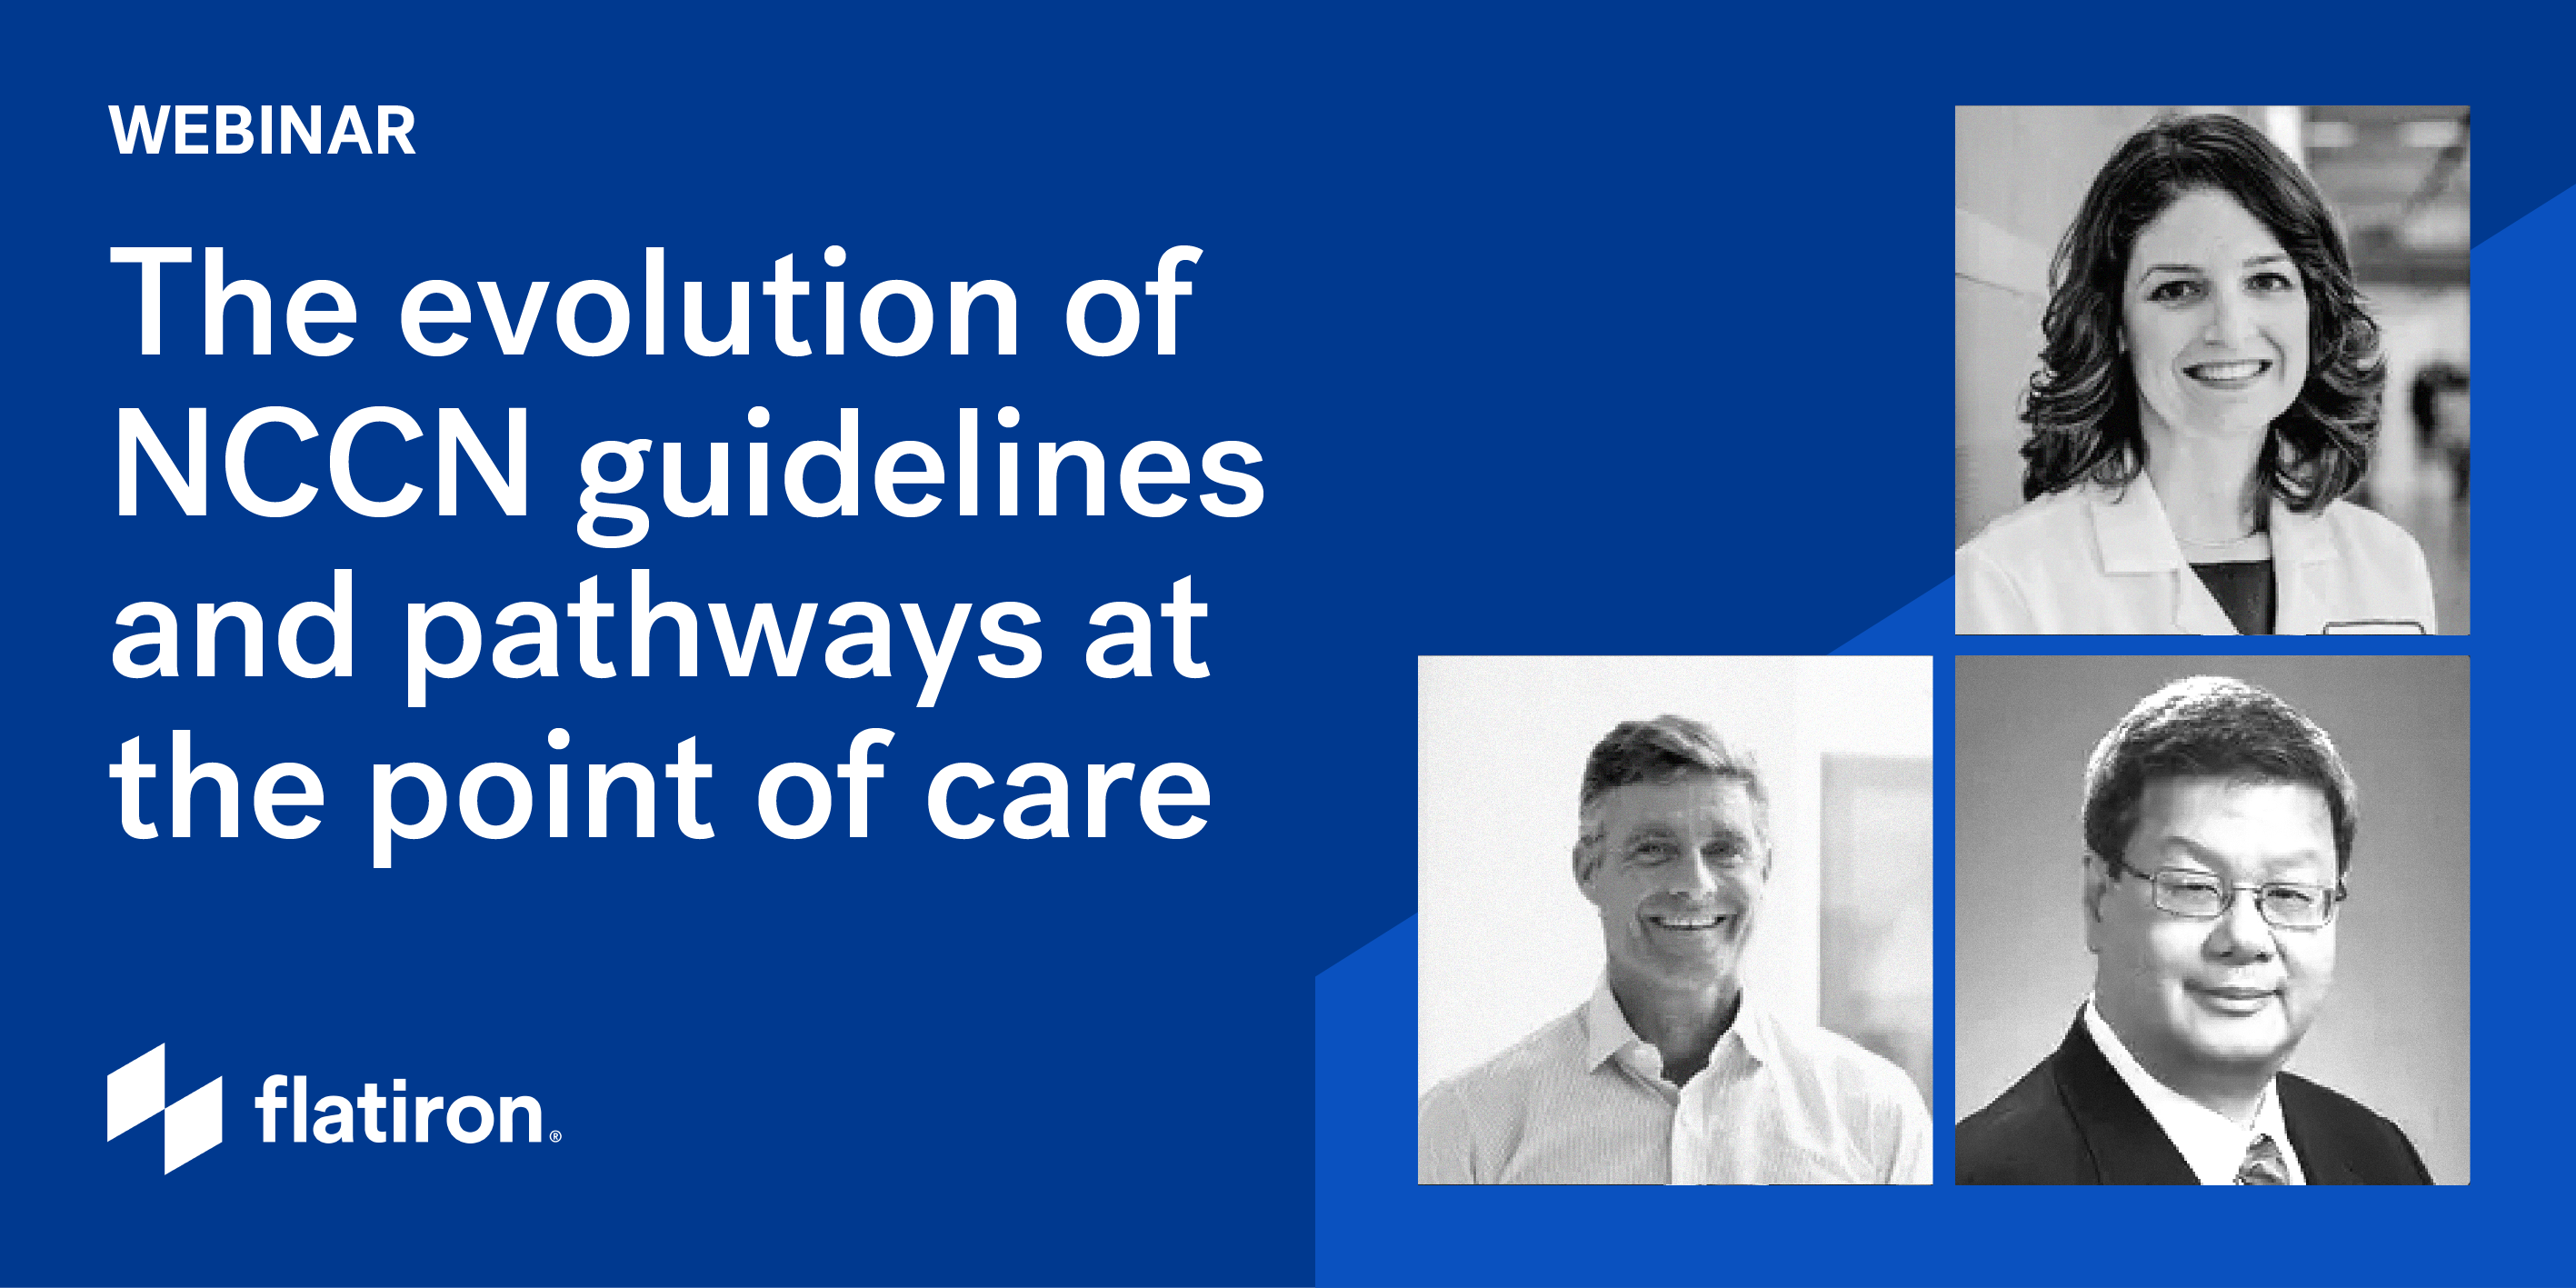 webinar-evolution-of-nccn-guidelines-pathways-at-the-point-of-care